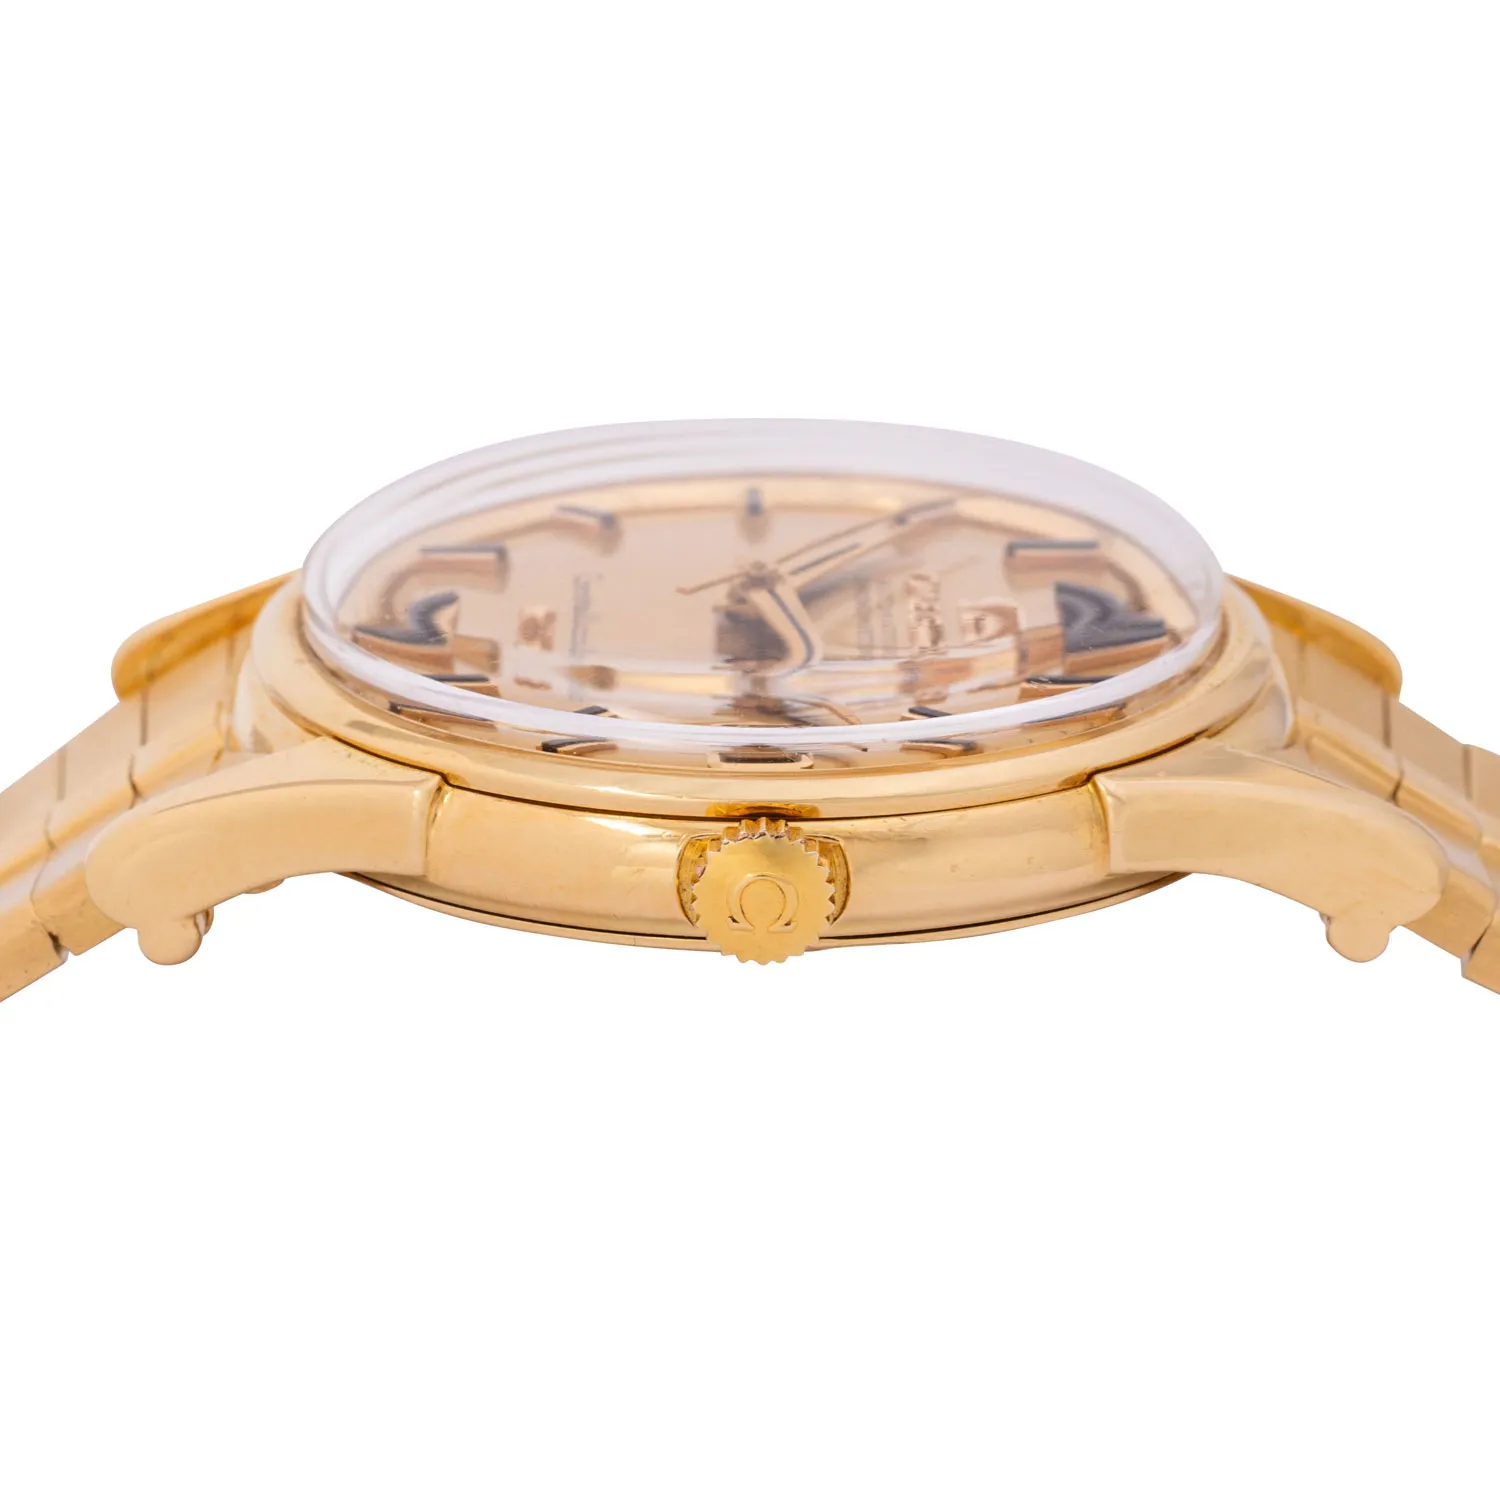 Omega Constellation 14393 35mm Yellow gold Gold 1